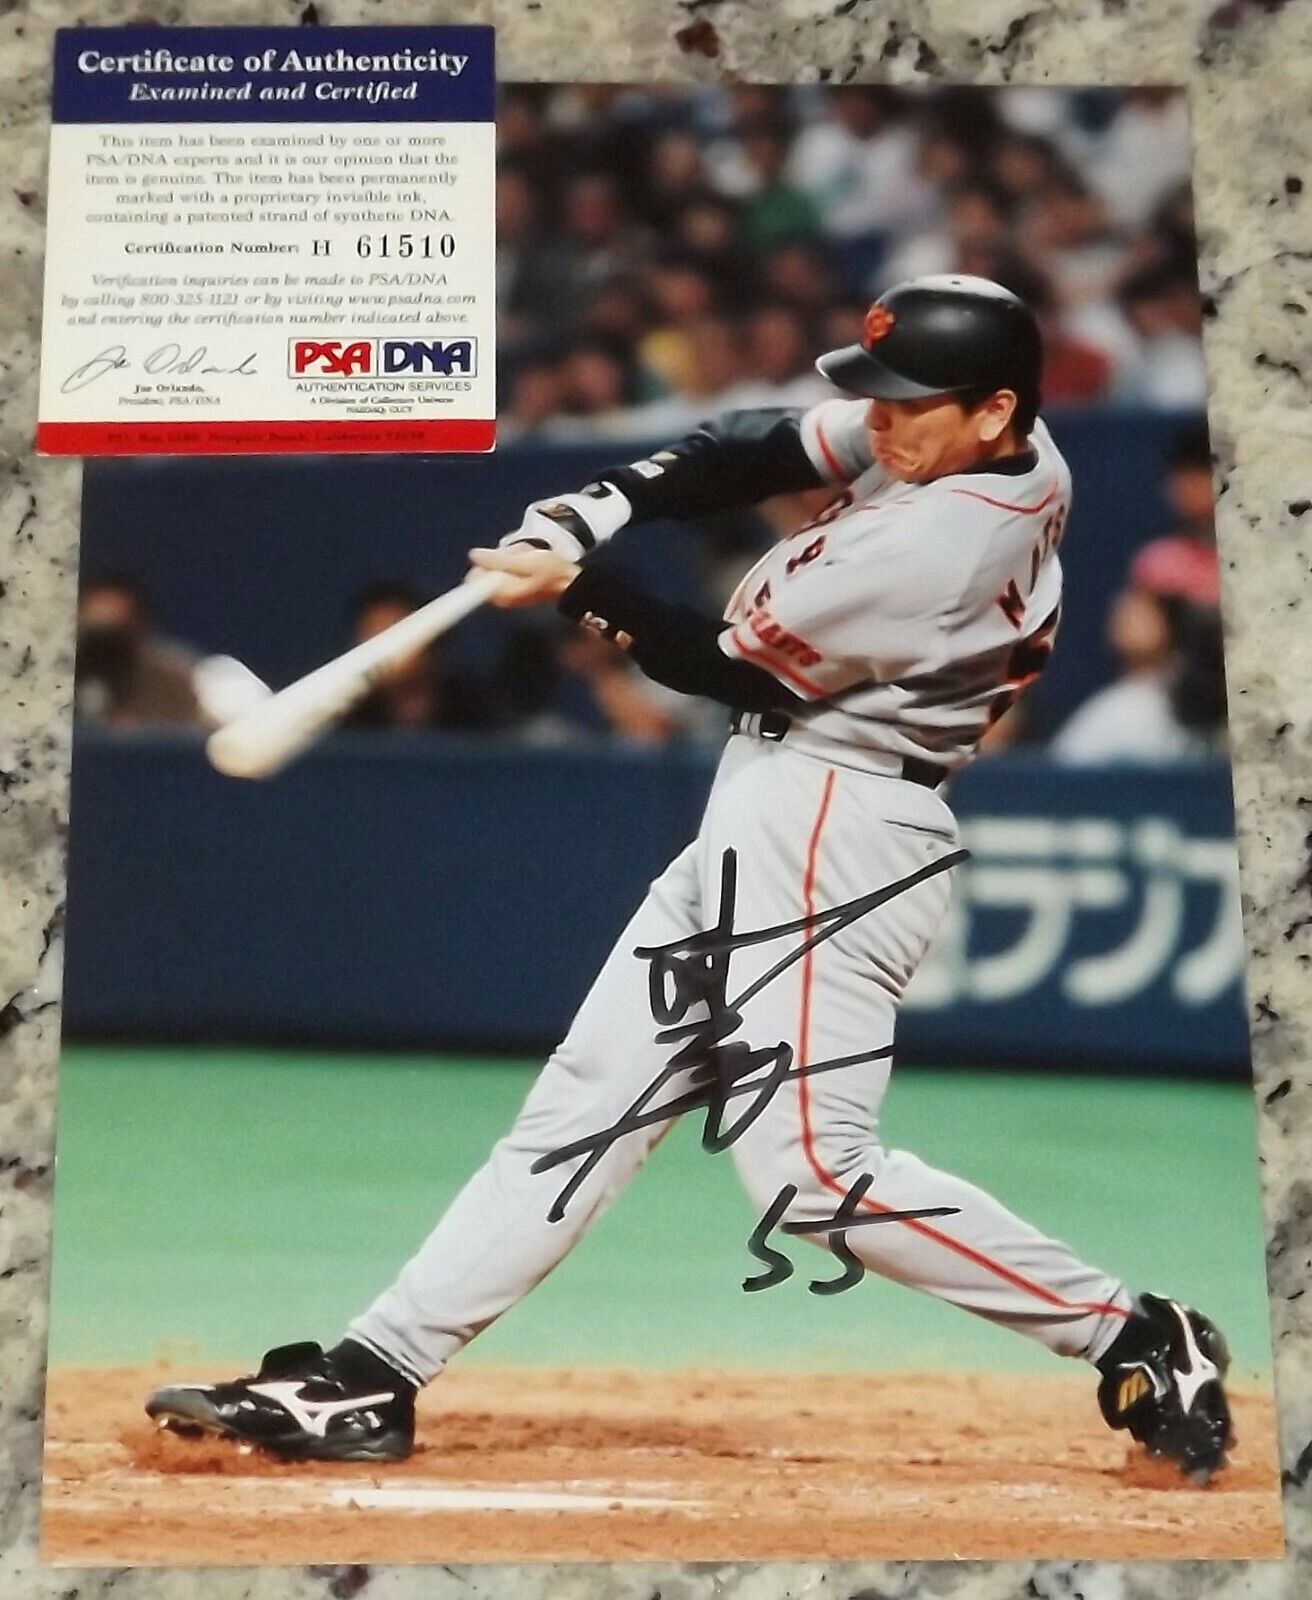 EXTREMELY RARE Hideki Matsui Signed in JAPANESE Autographed 6.5x9 Photo Poster painting PSA COA!